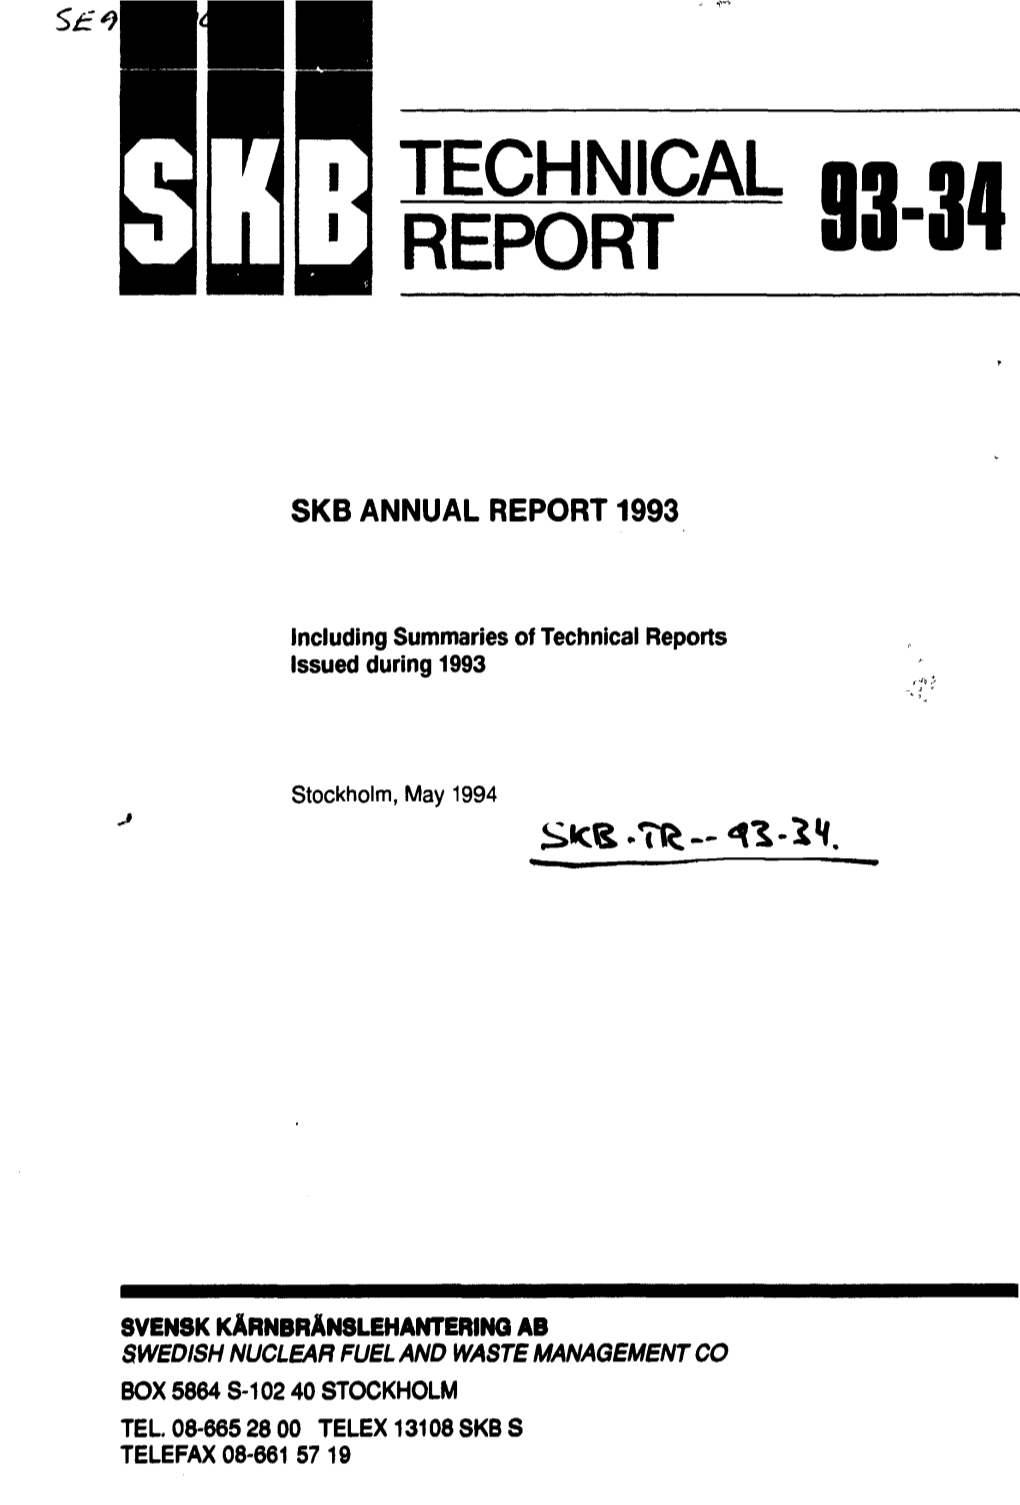 Technical Report 93-34